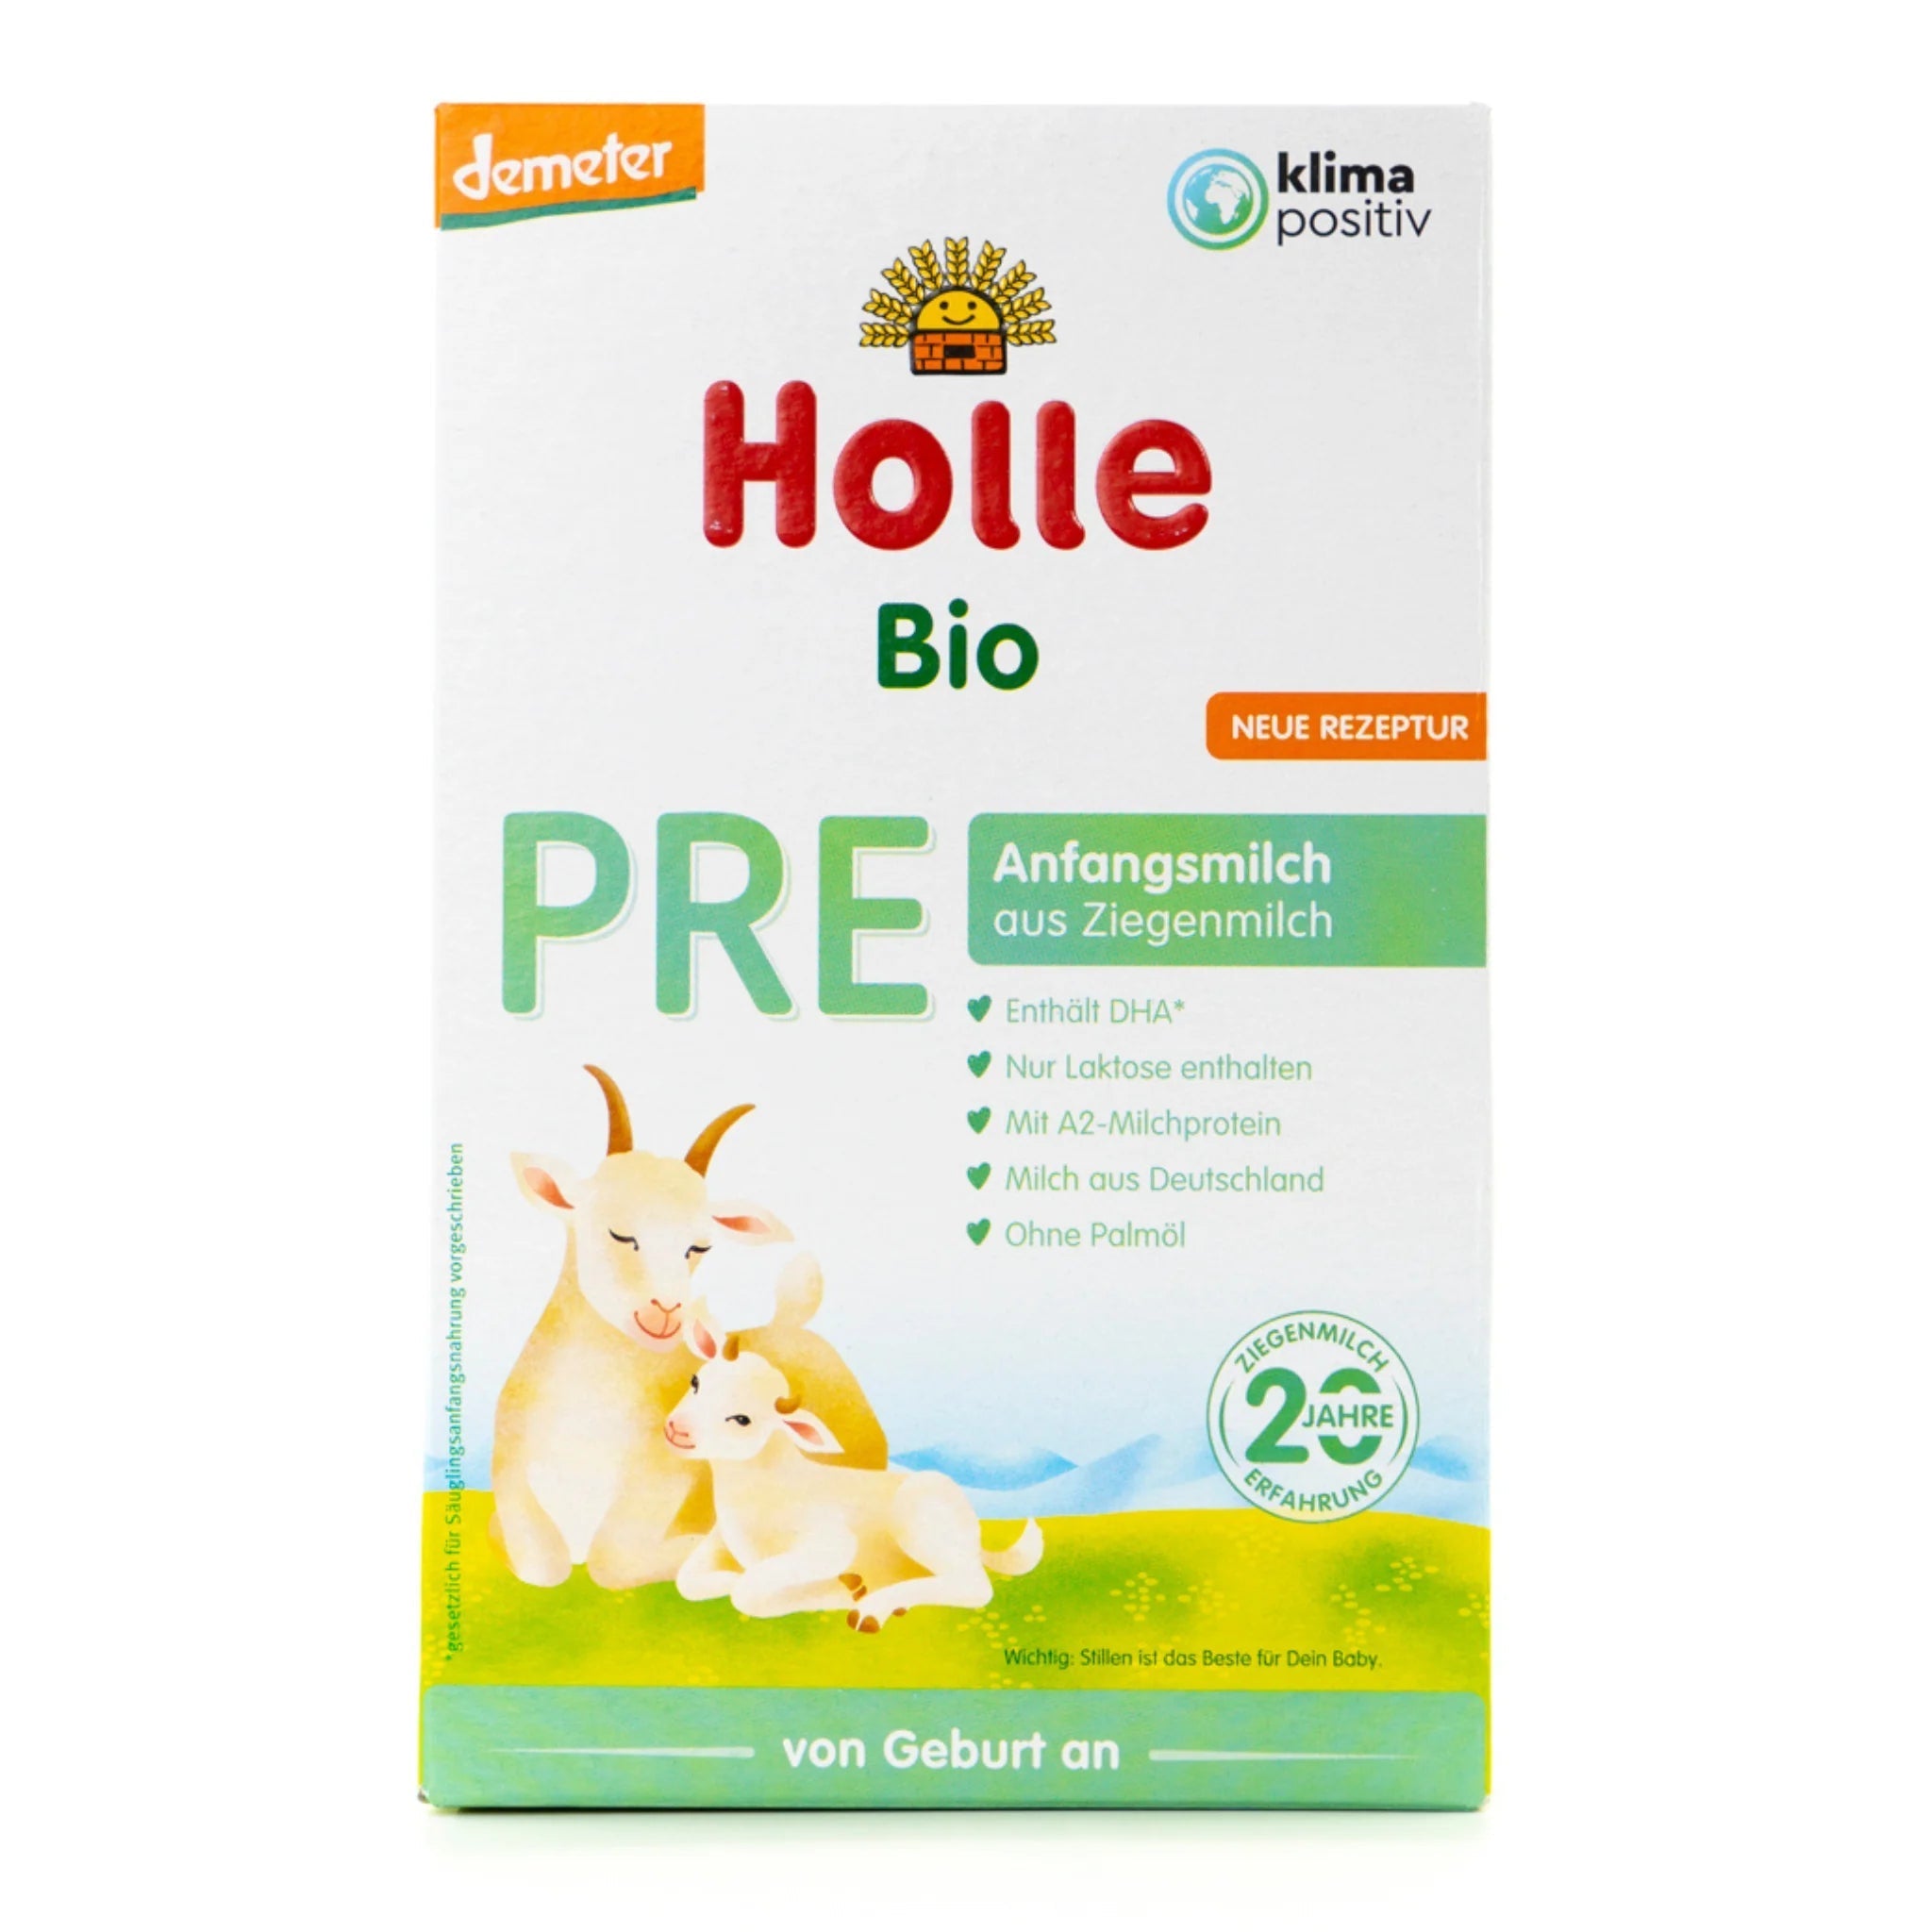 Holle Organic Infant Goat Milk Formula PRE with DHA (24 boxes)